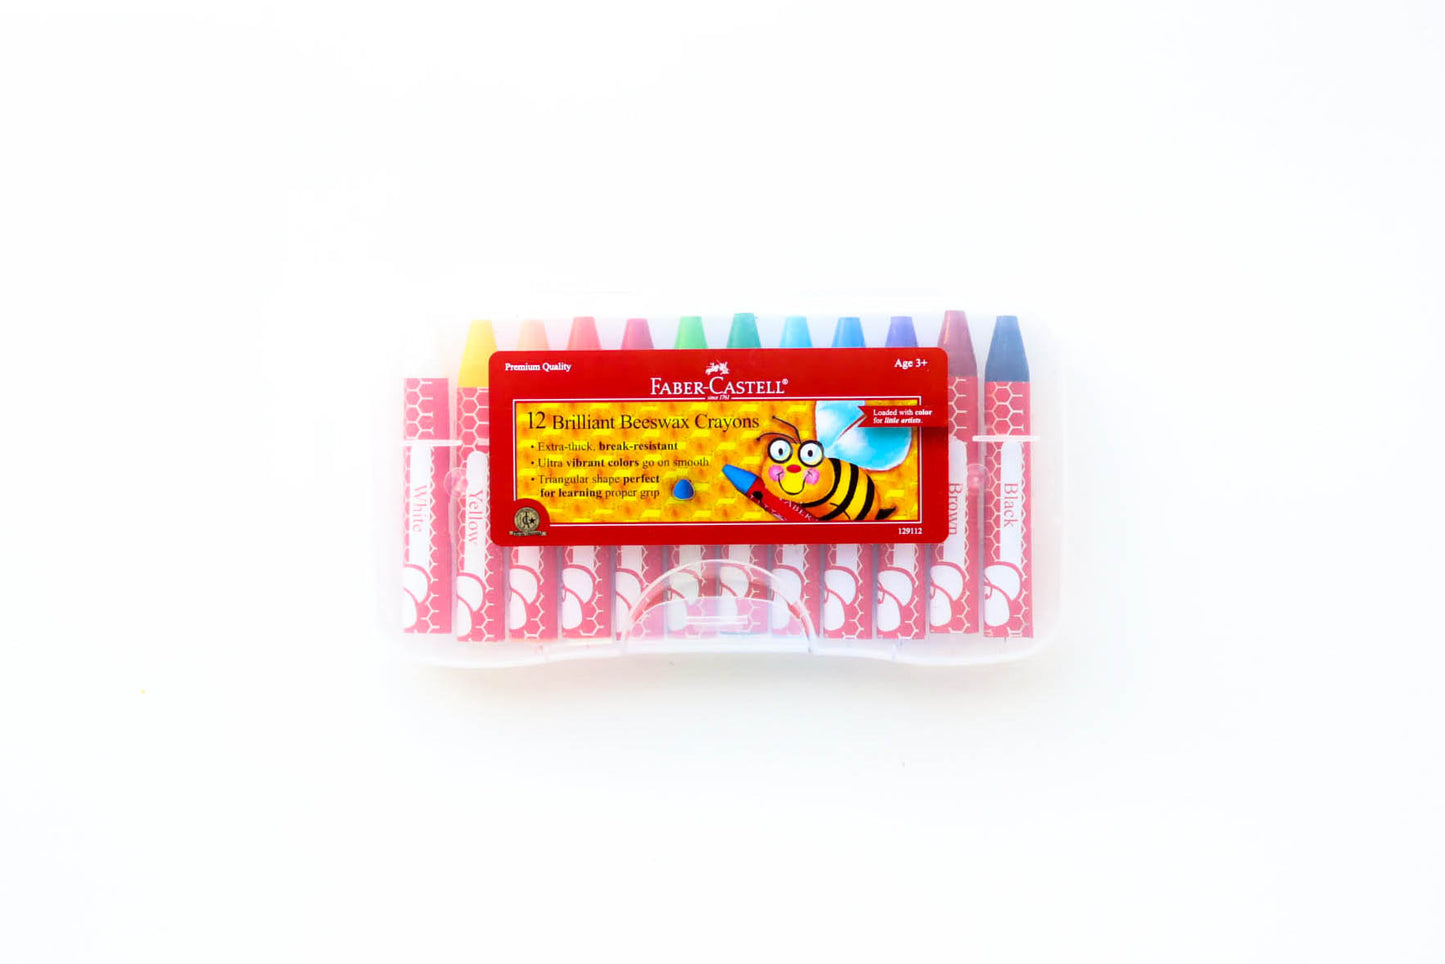 24 Brilliant Beeswax Crayons in Storage Case - #129124 – Faber